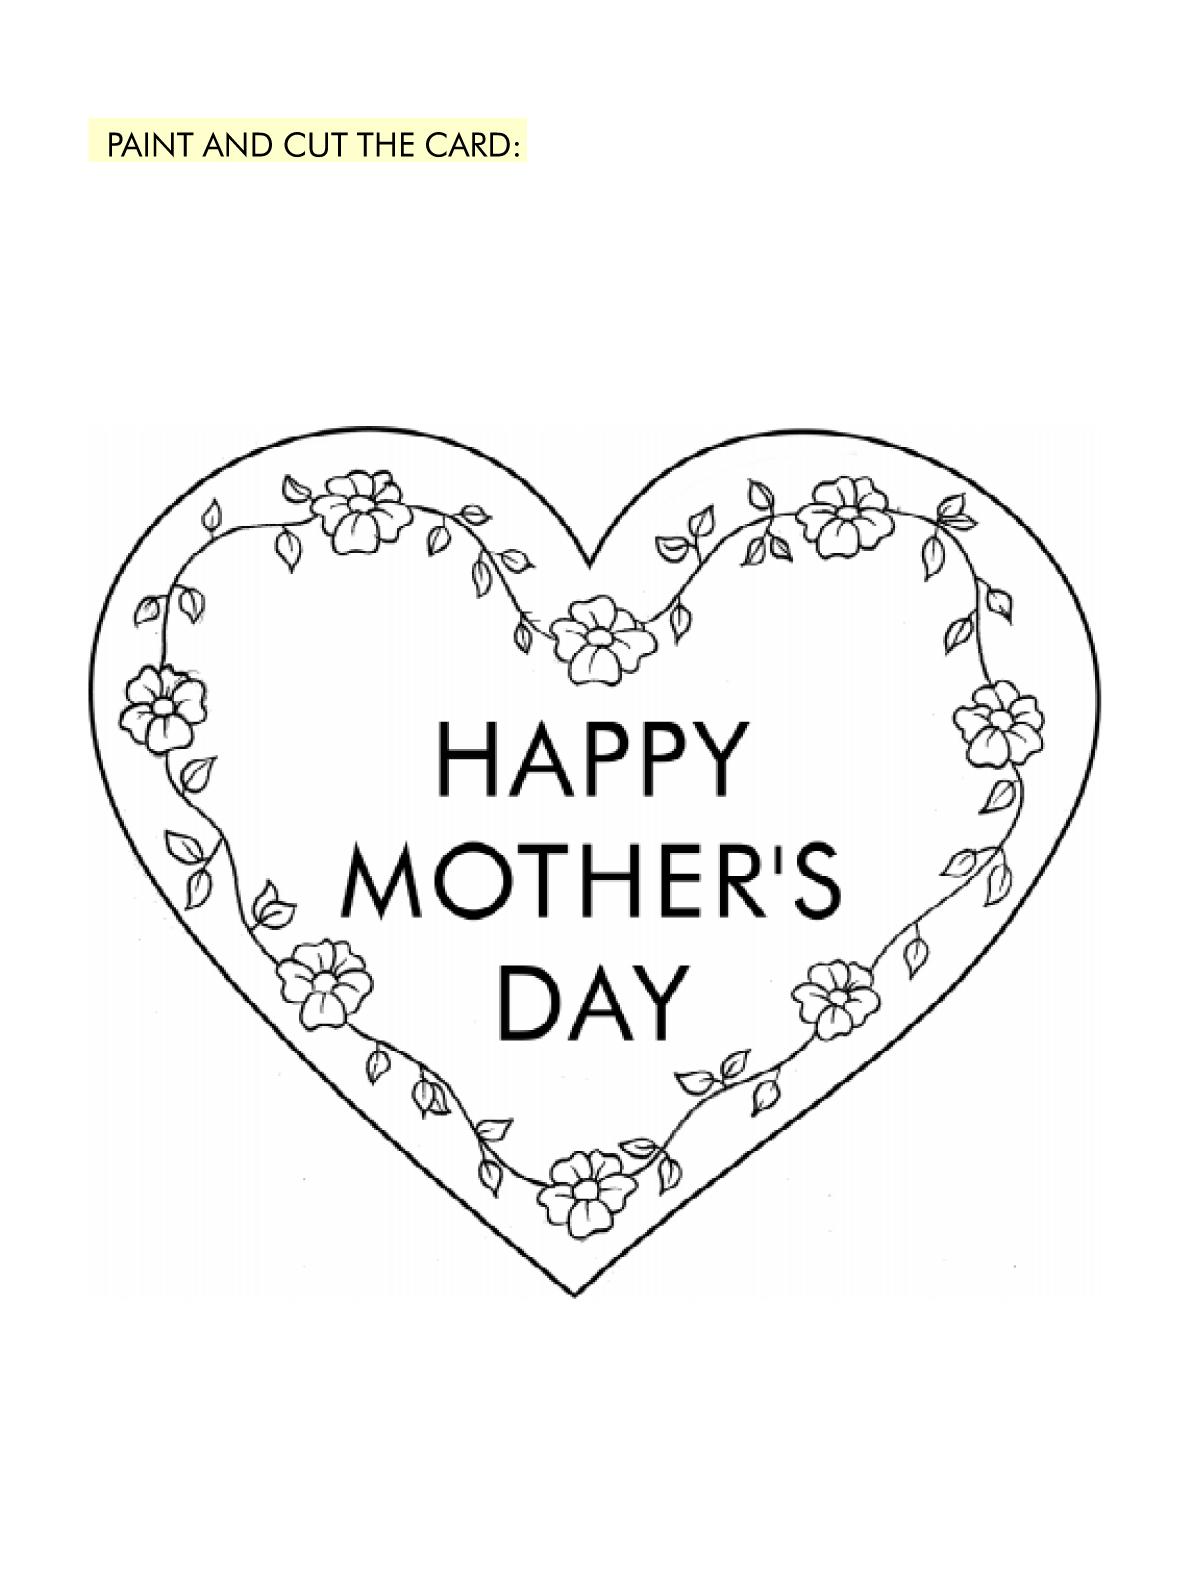 English for children MOTHER'S DAY